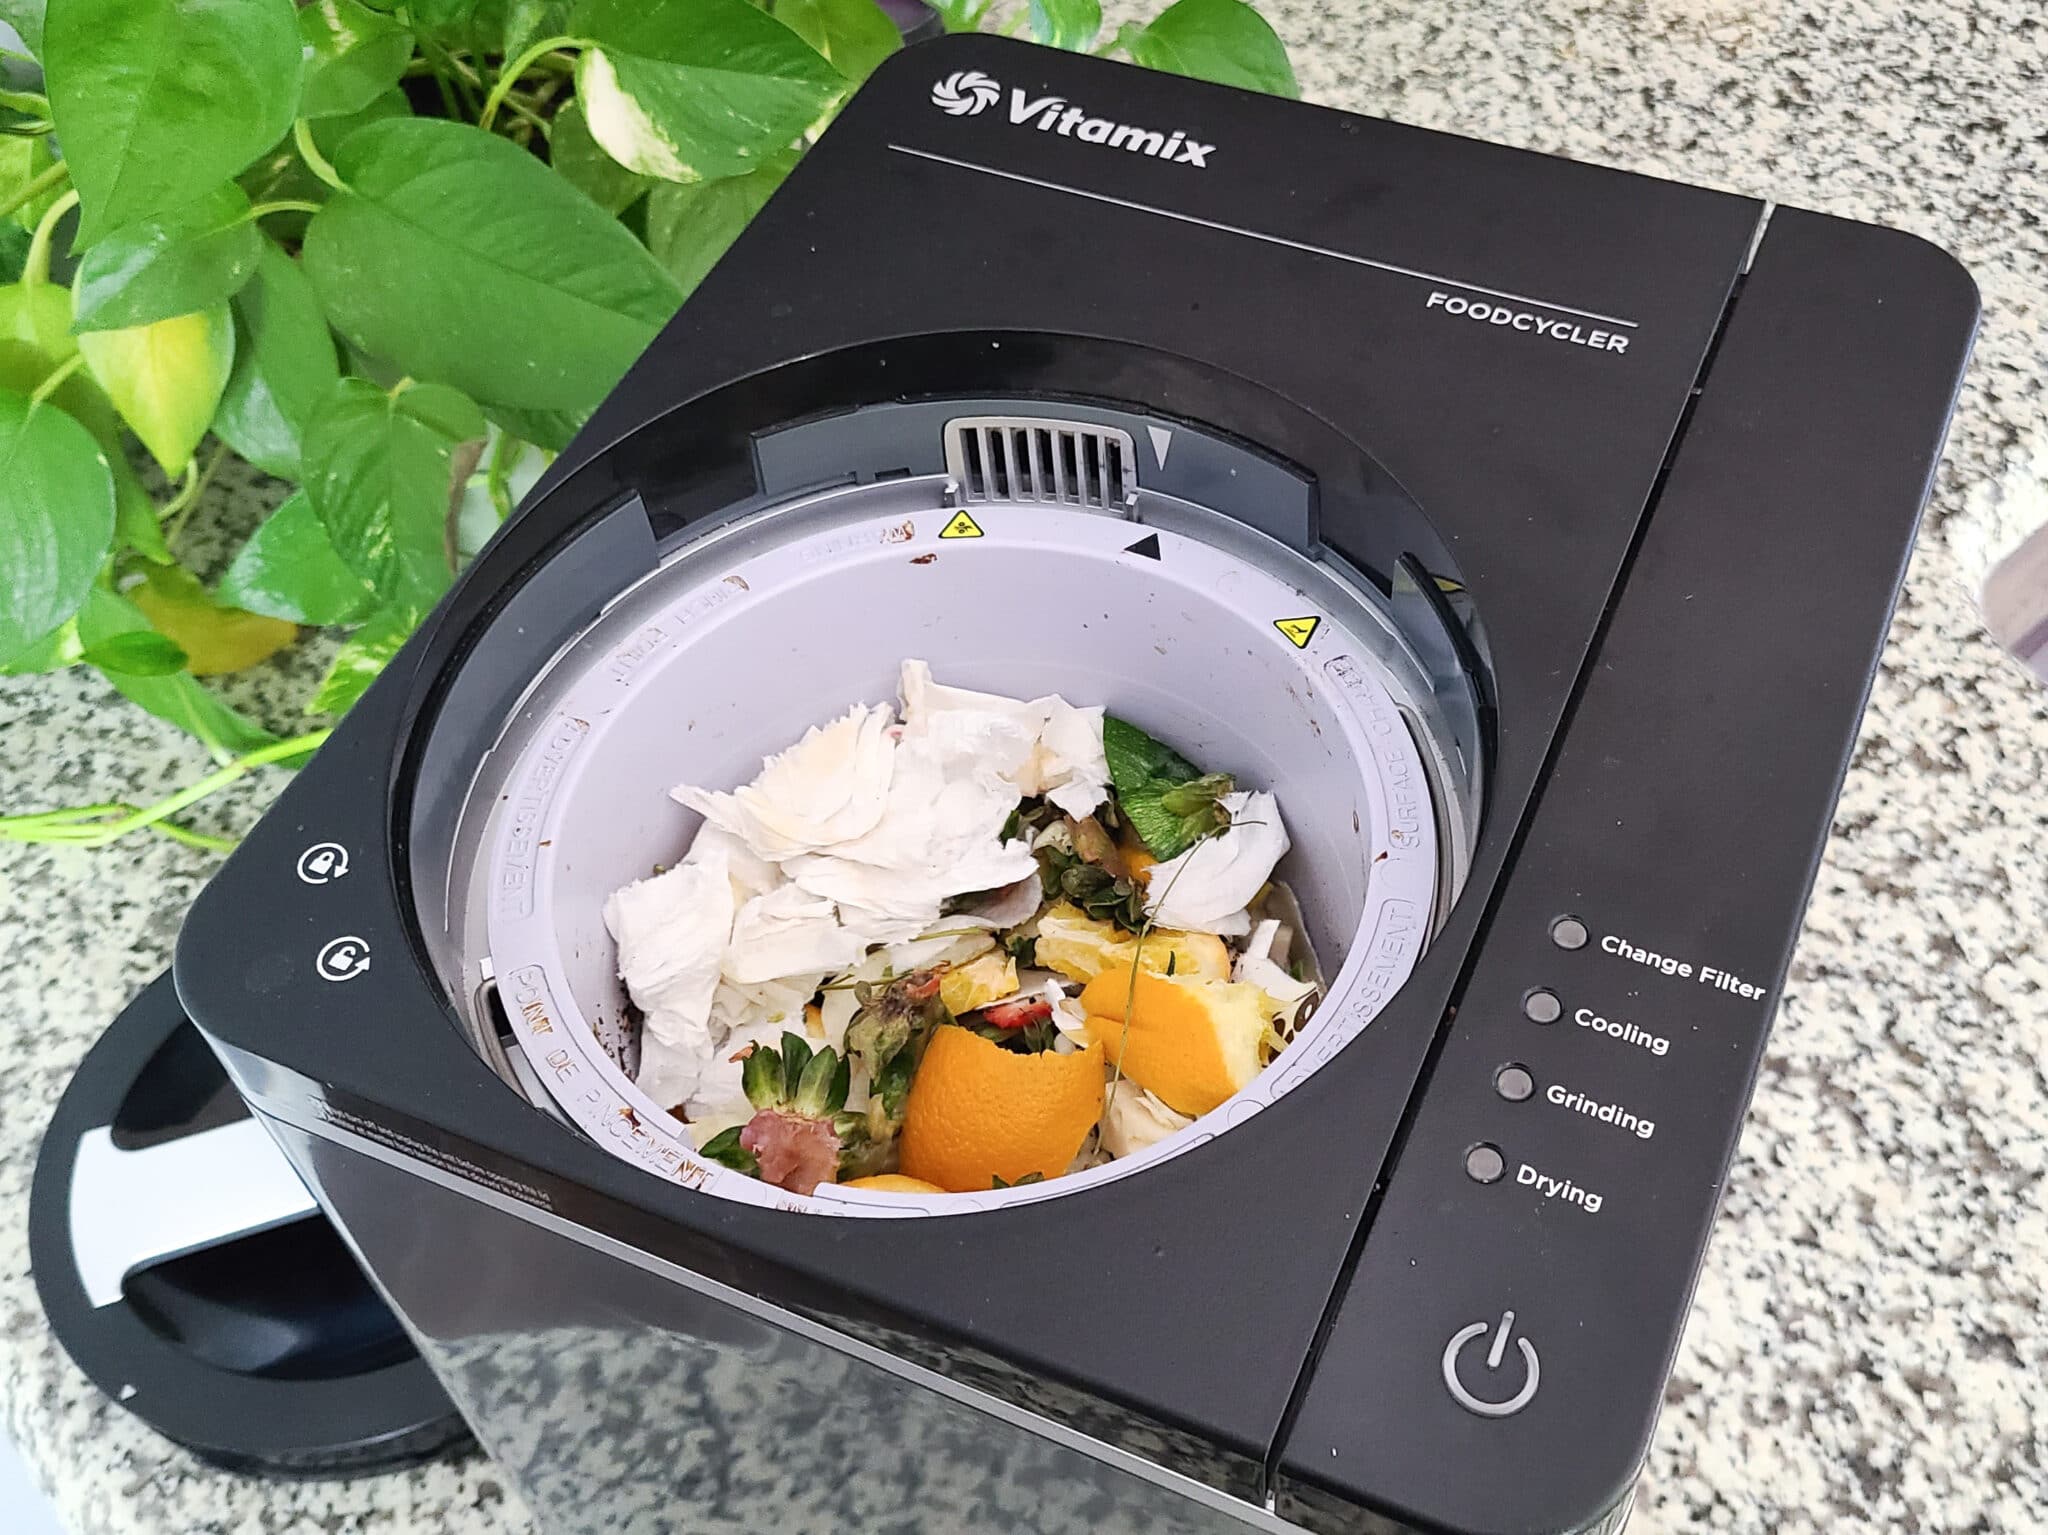 Shows Vitamix Foodcycler full of food scraps sitting on a kitchen countertop